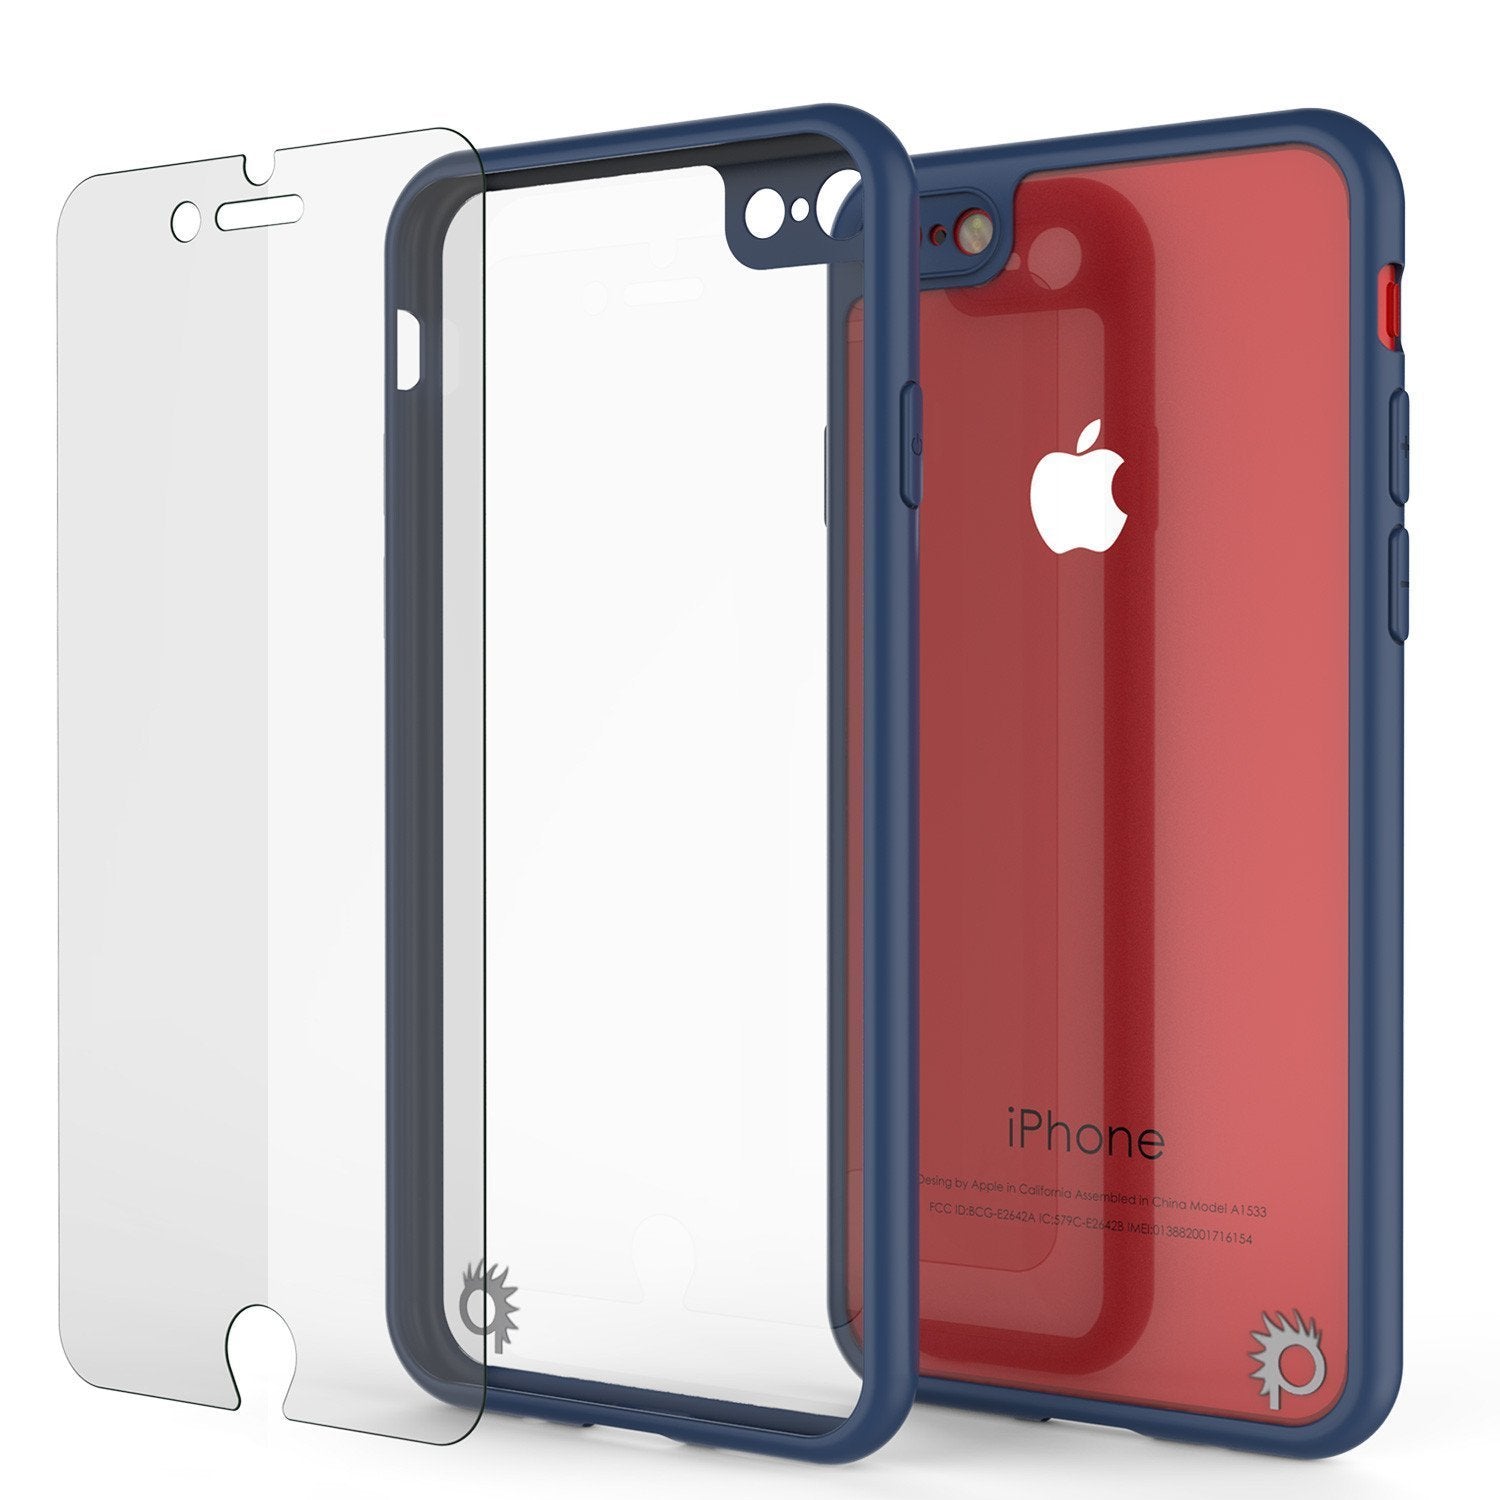 iPhone 8 Case [MASK Series] [NAVY] Full Body Hybrid Dual Layer TPU Cover W/ protective Tempered Glass Screen Protector